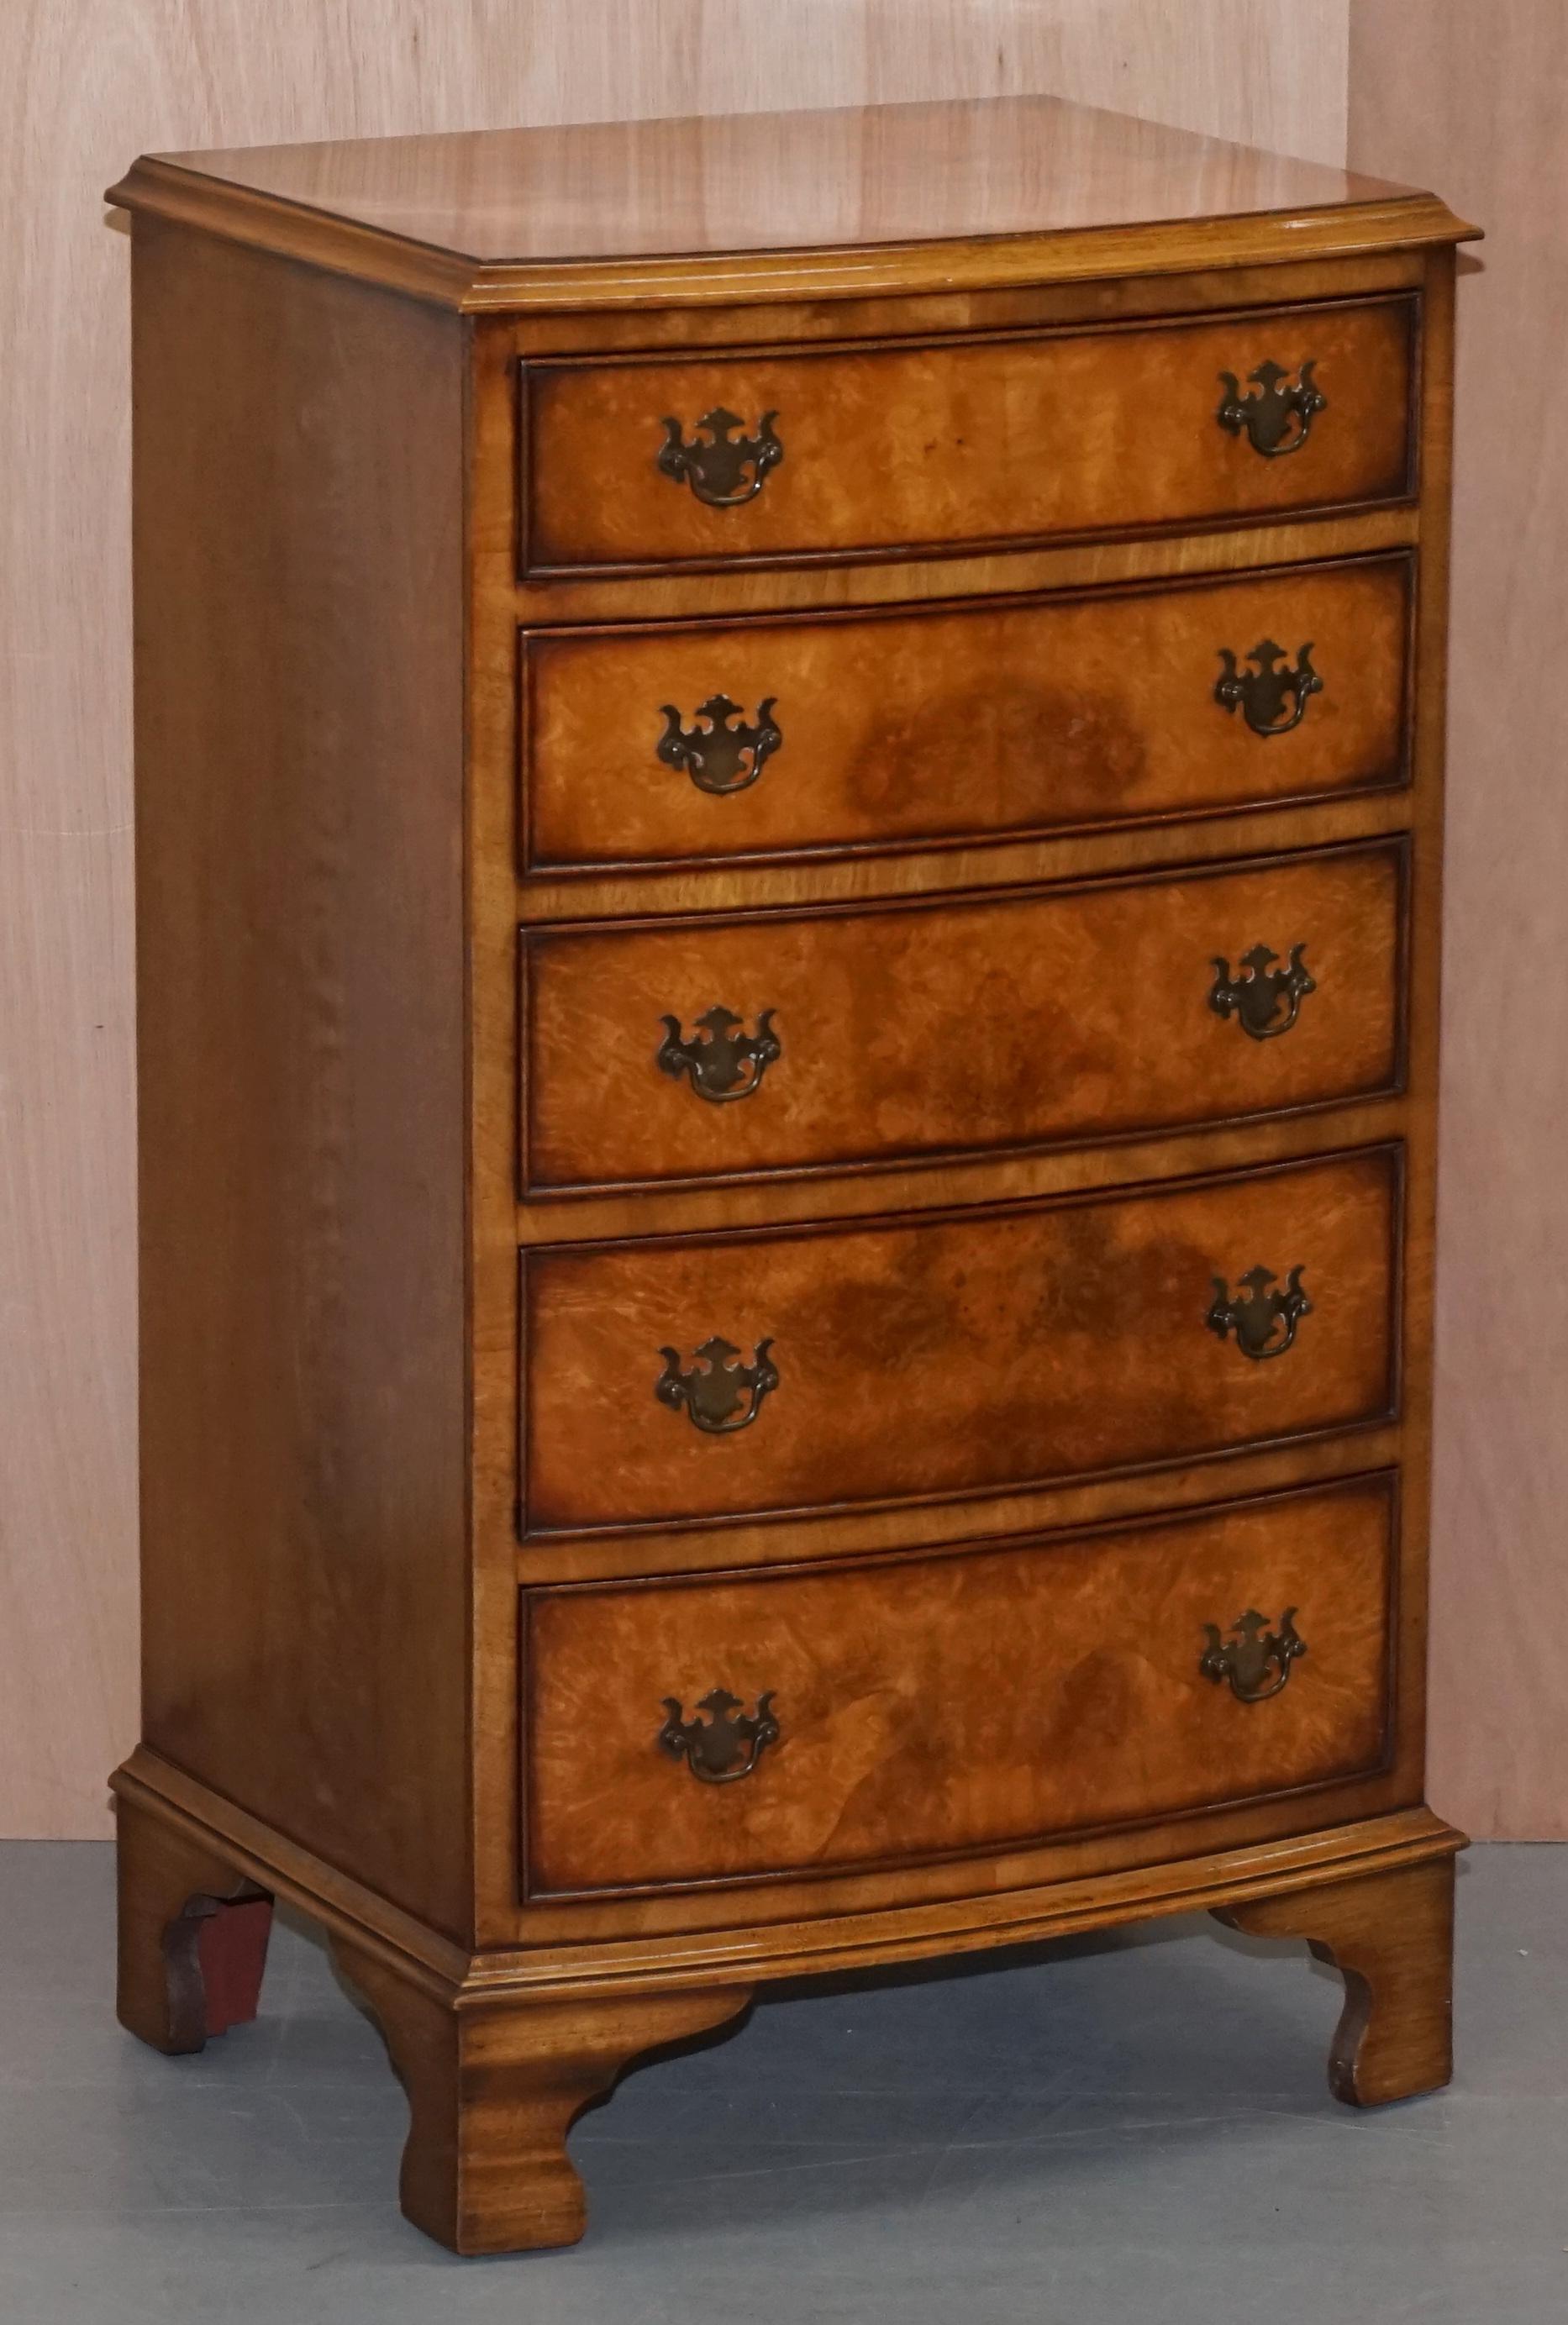 We are delighted to this stunning vintage Bavan Funnell Burr Walnut medium sized tall boy chest of drawers

A beautiful functional piece, handmade in England by one of our generations great furniture makers.

Burr walnut is by far my favourite